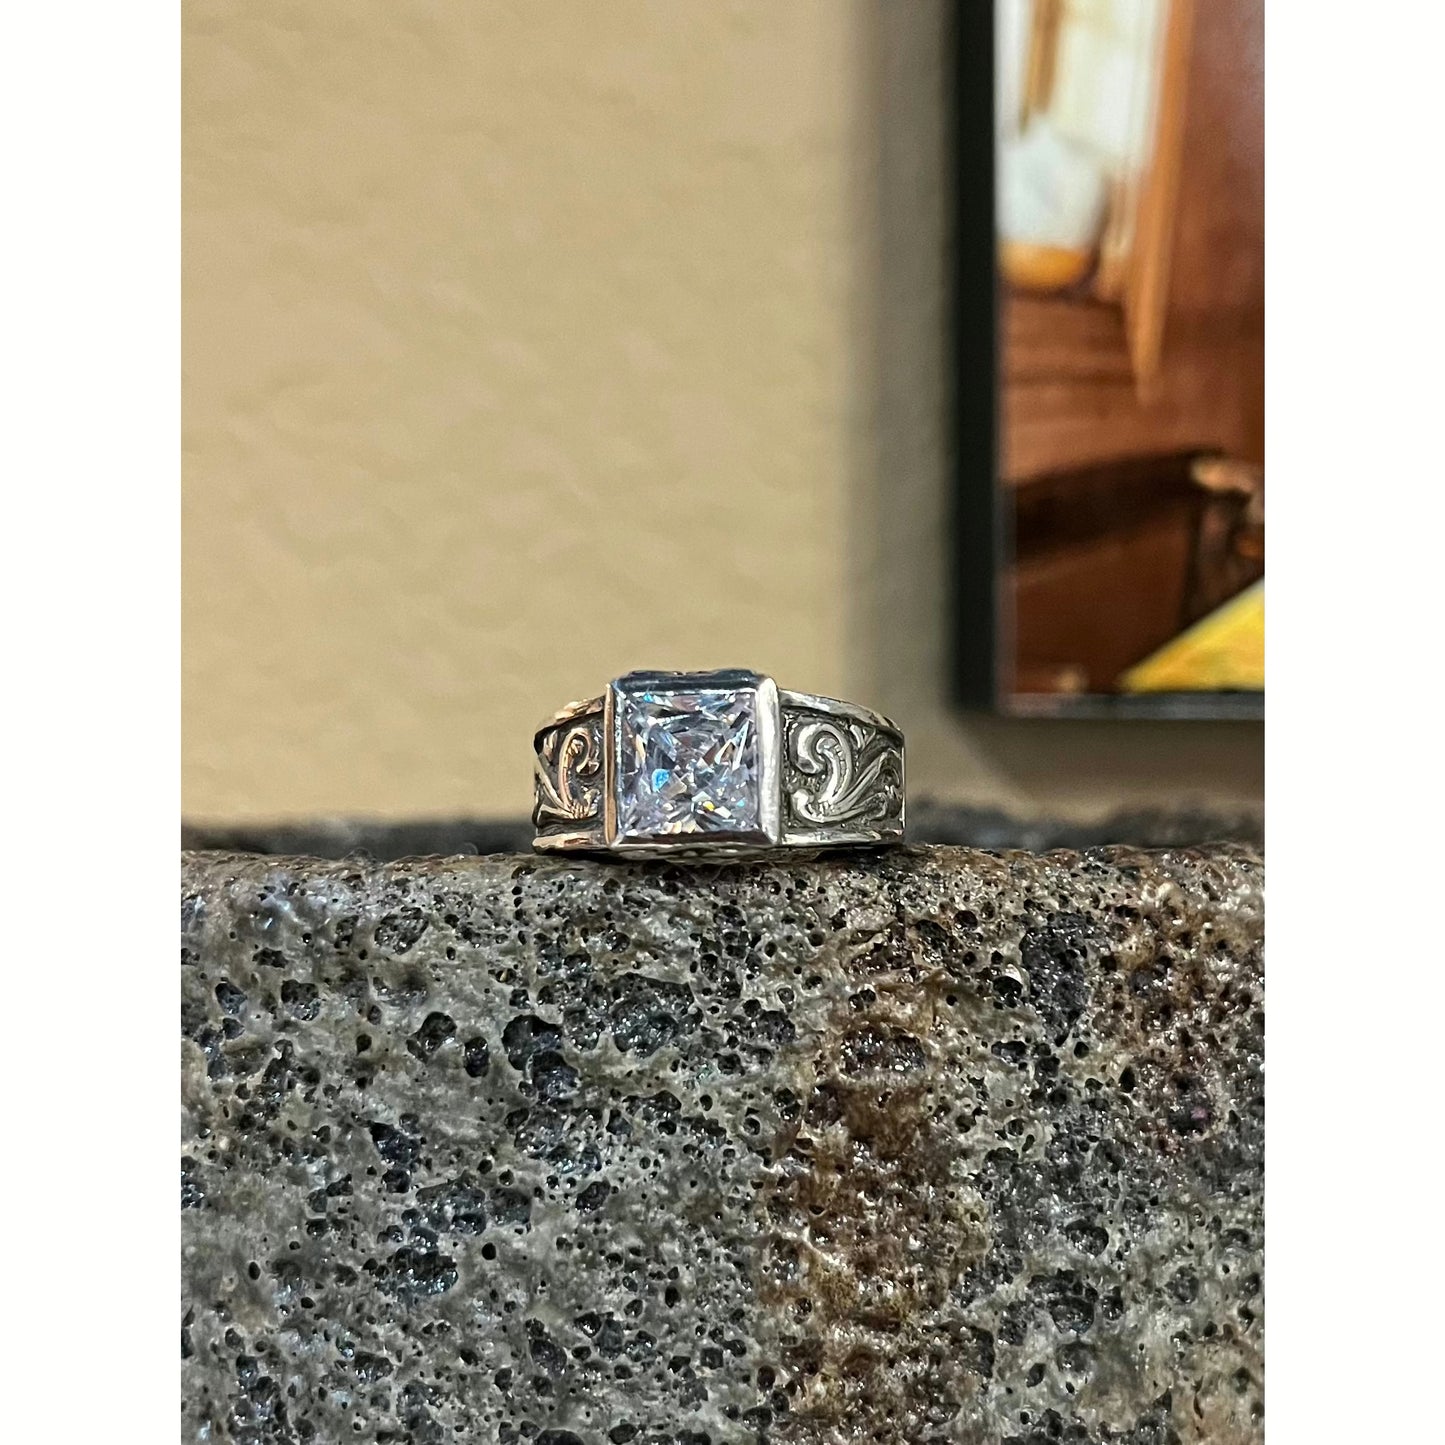 "Farrah" is a solid sterling silver custom ring with a low-profile bezel set 8 mm princess cut cubic zirconia. This beautiful unique ring features hand engraved scrolls on each side of the band with intricate scroll work on the front and back edges of the ring including around the stone. This elegant rings tapered band offers our most comfortable fit.